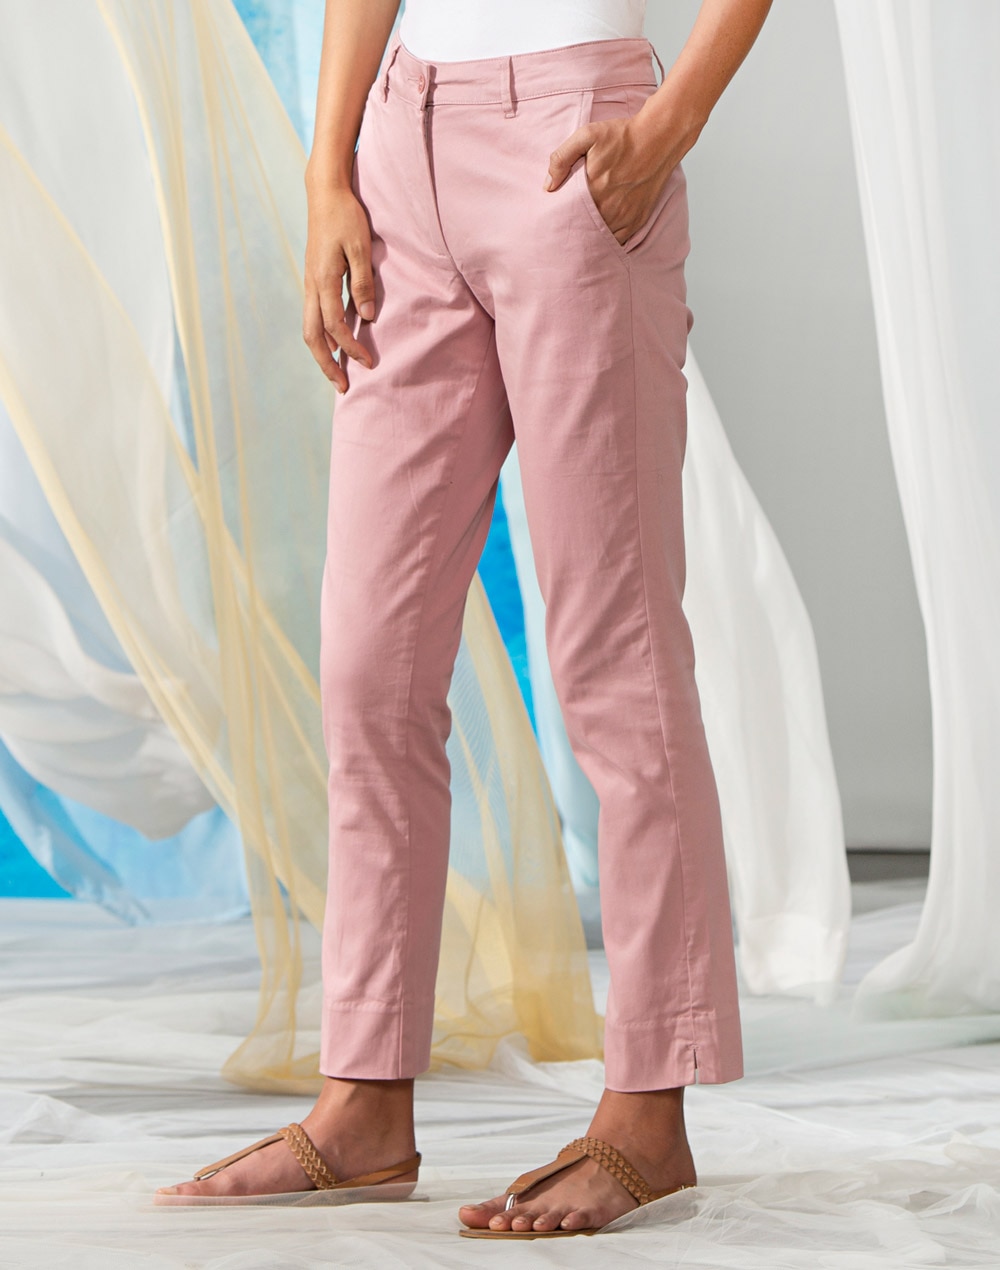 Buy Cotton Lycra Slim Fit Stretch Pant for Women Online at